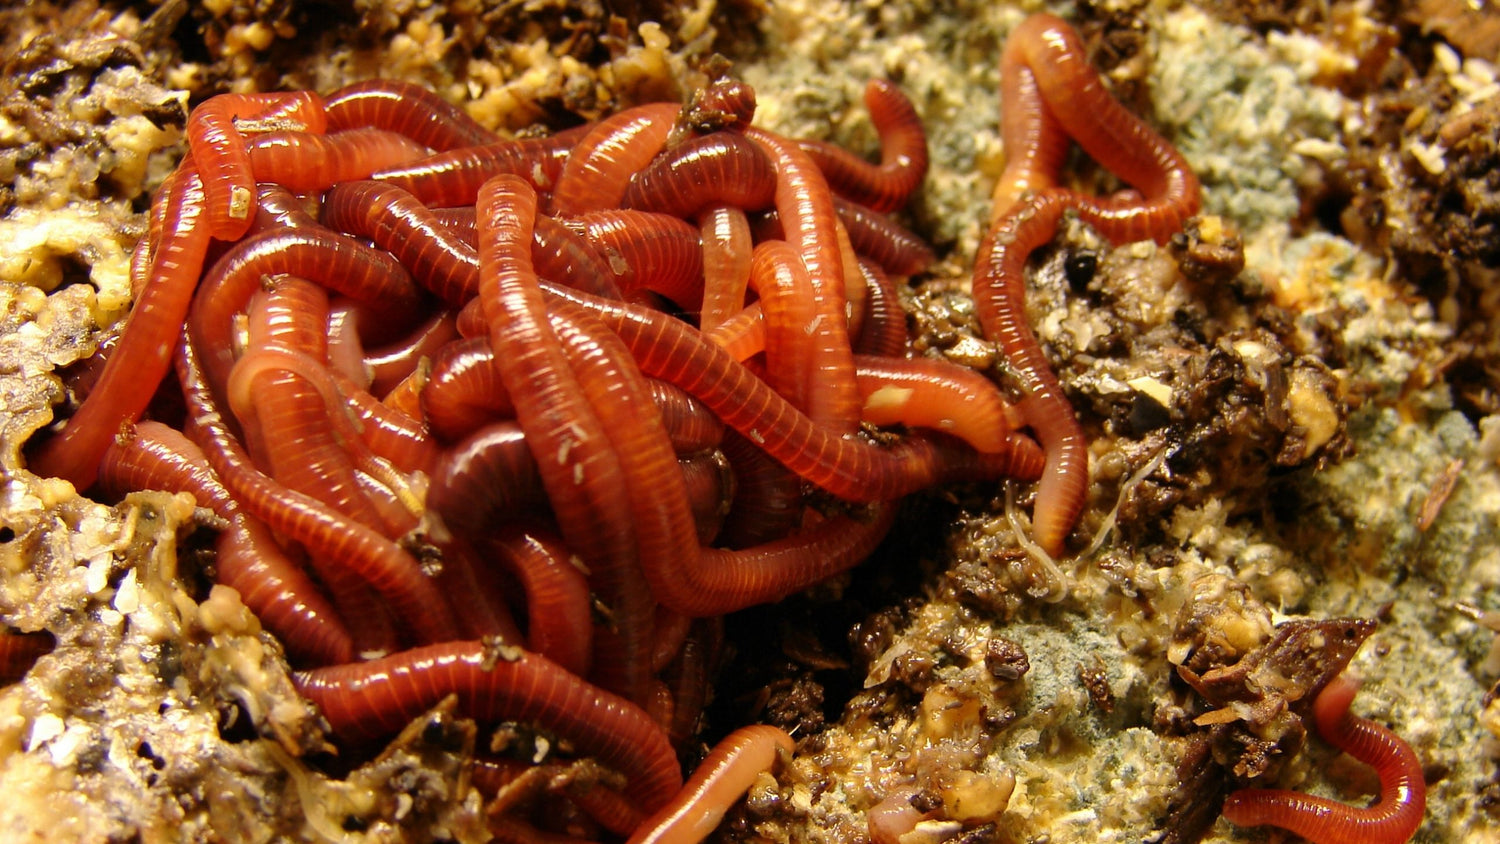 What Do Composting Worms Eat? Meme's Worms